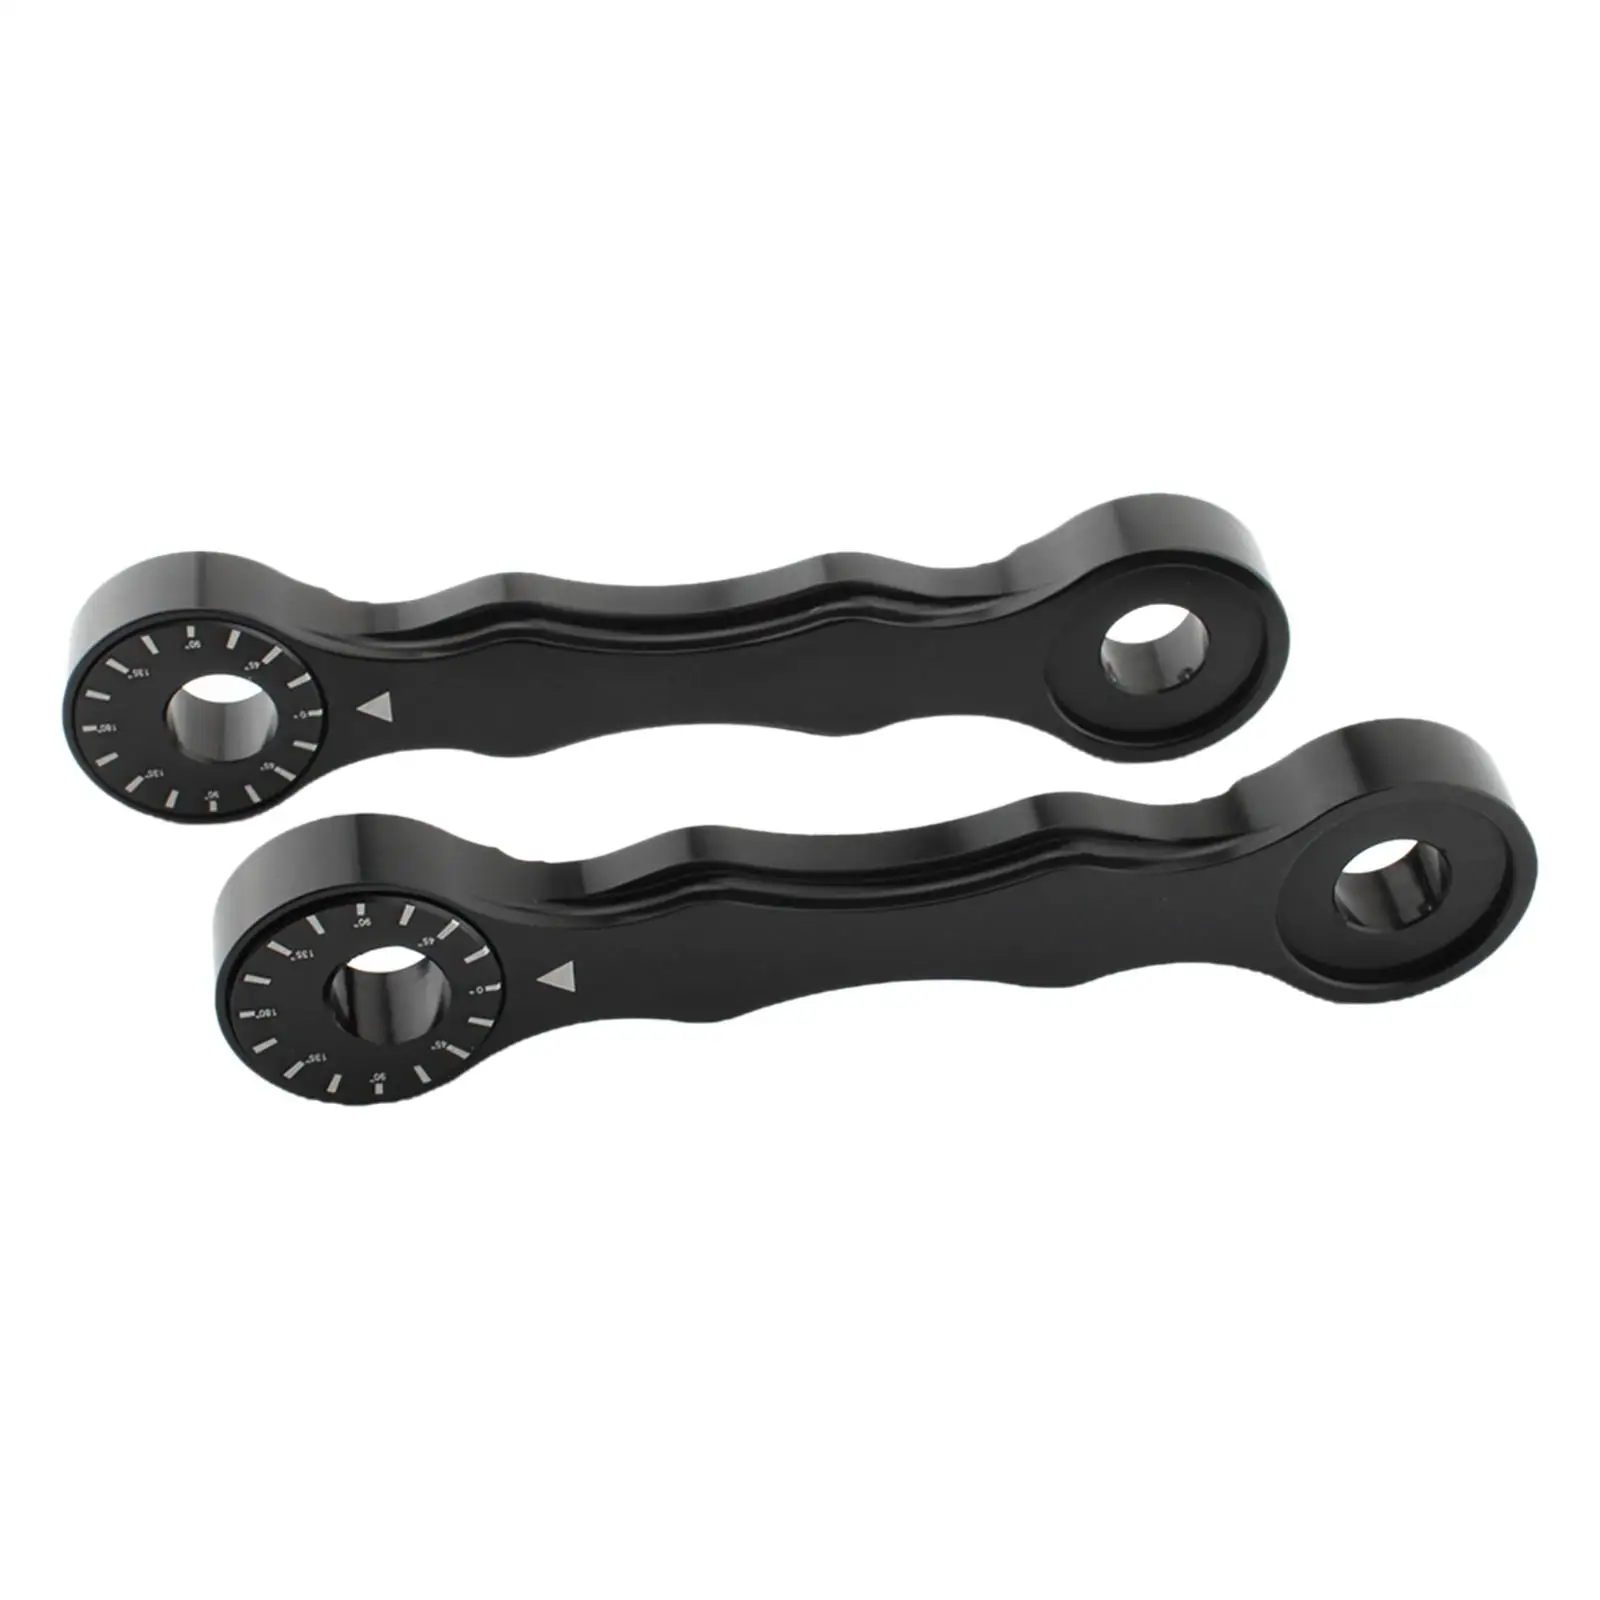 2x Motorcycle Lowering Links set Black replace parts for Suzuki RM125 200